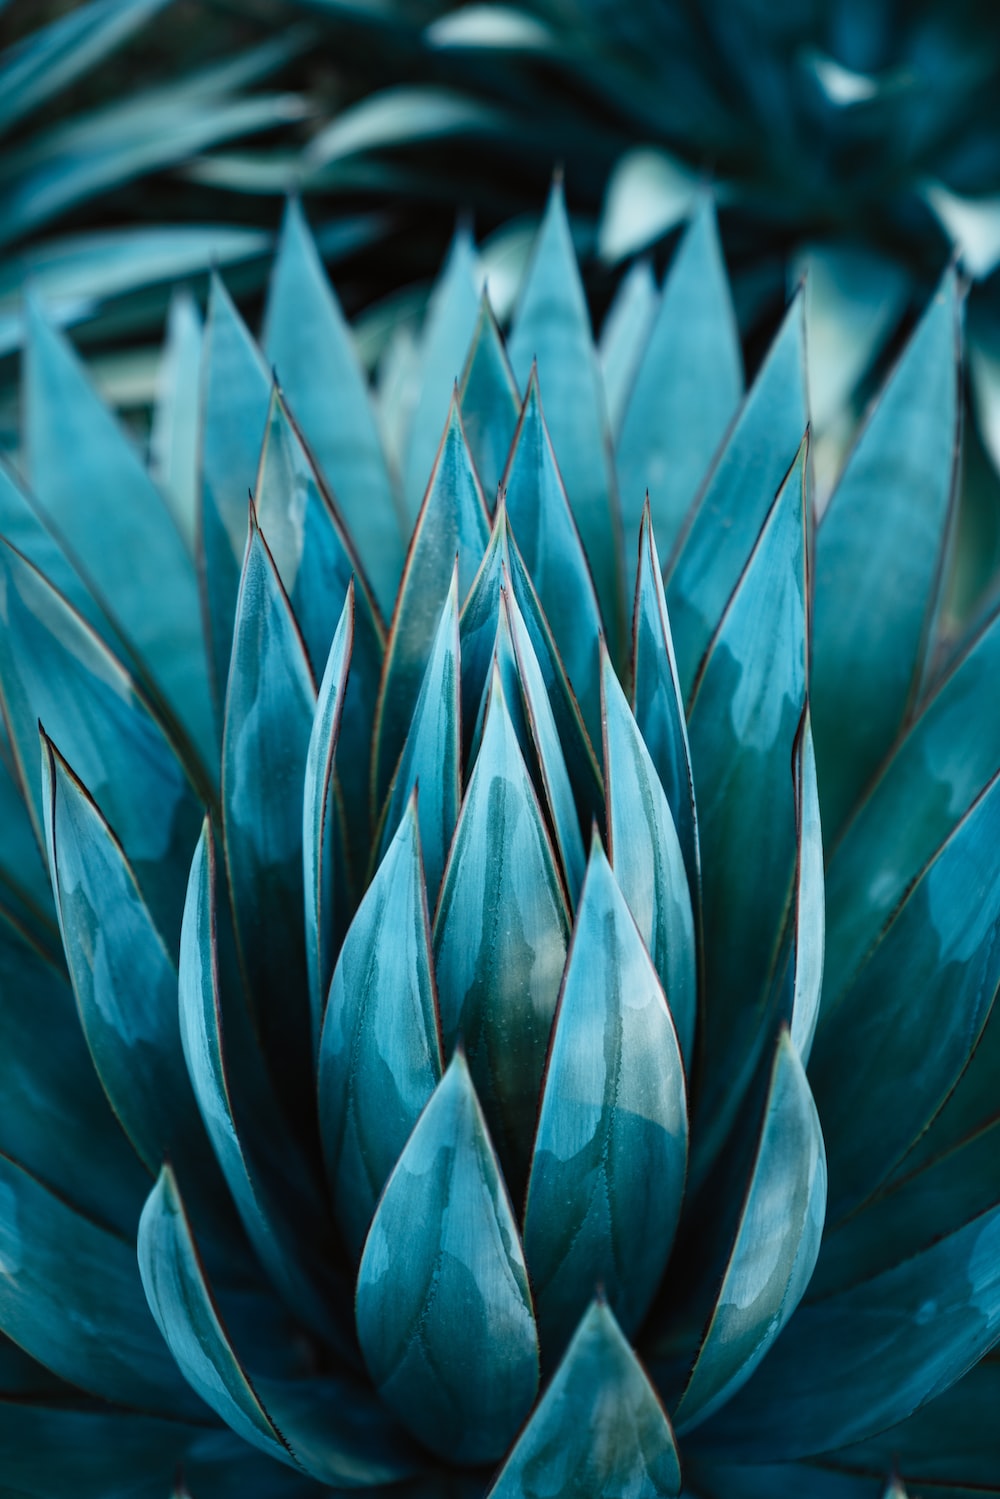 Blue Agave Picture. Download Free Image